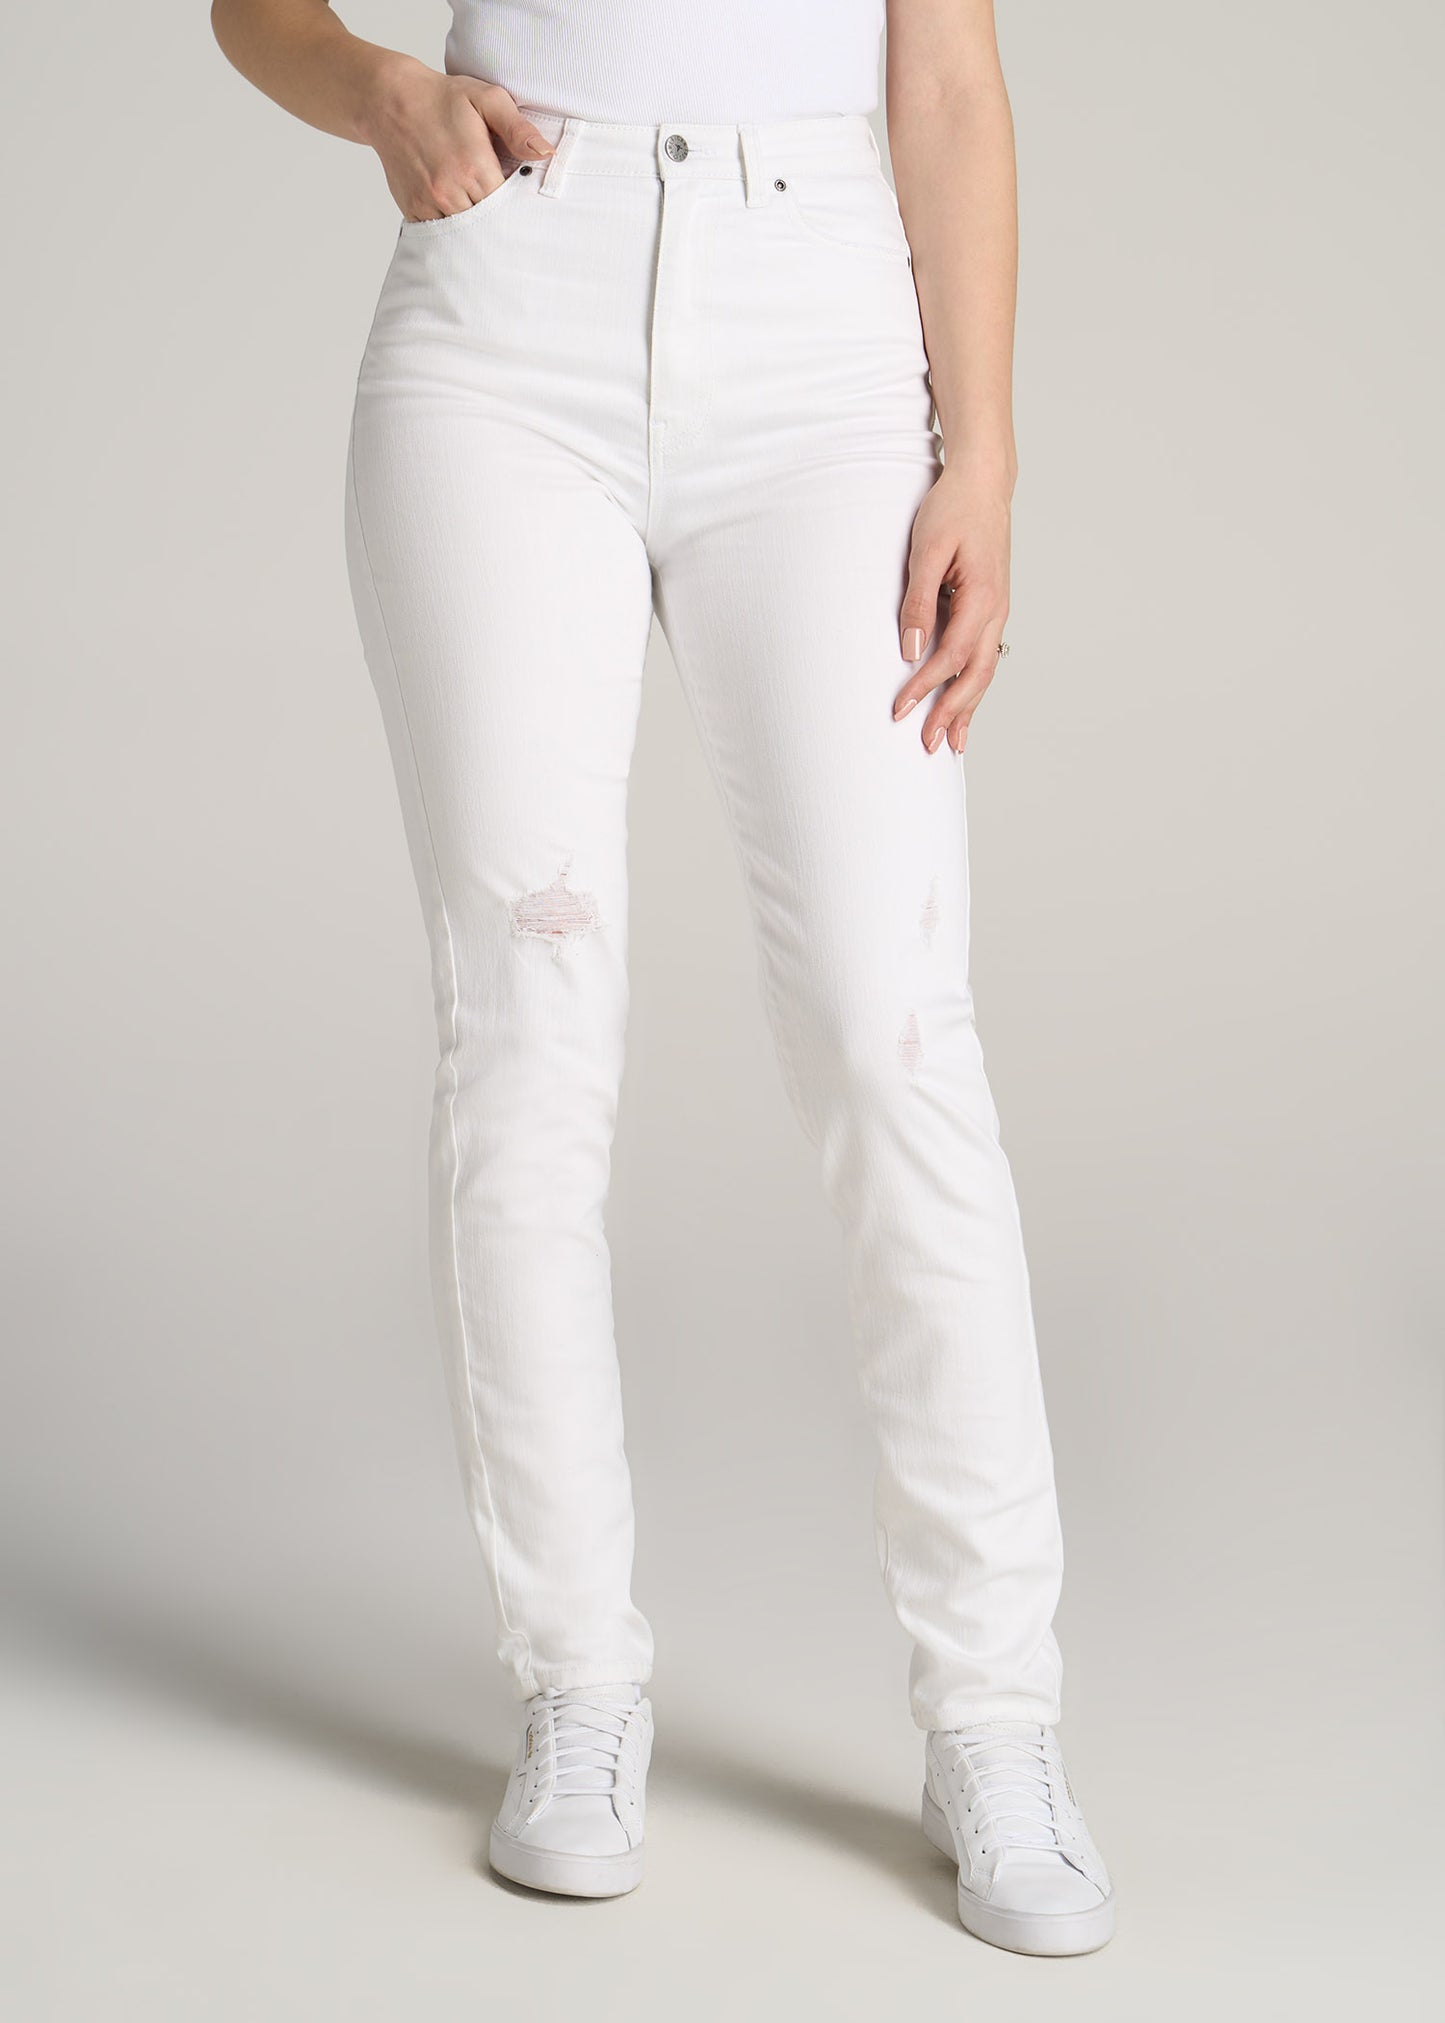 American-Tall-Women-Lola-Ultra-High-Rise-Stretch-Slim-Jeans-White-front